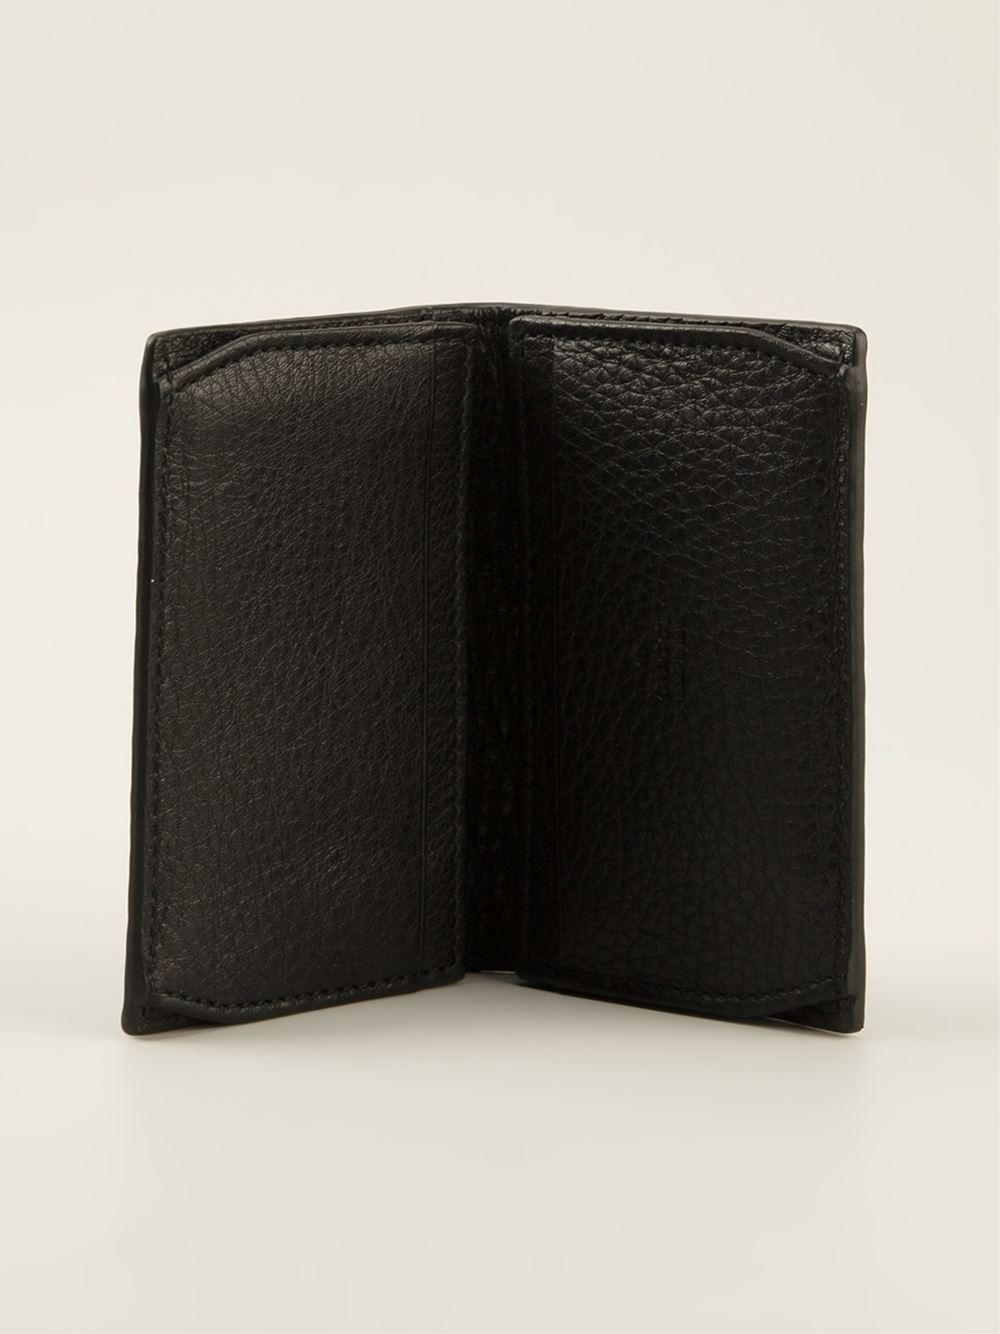 Lyst - Gucci Textured Card Holder in Black for Men